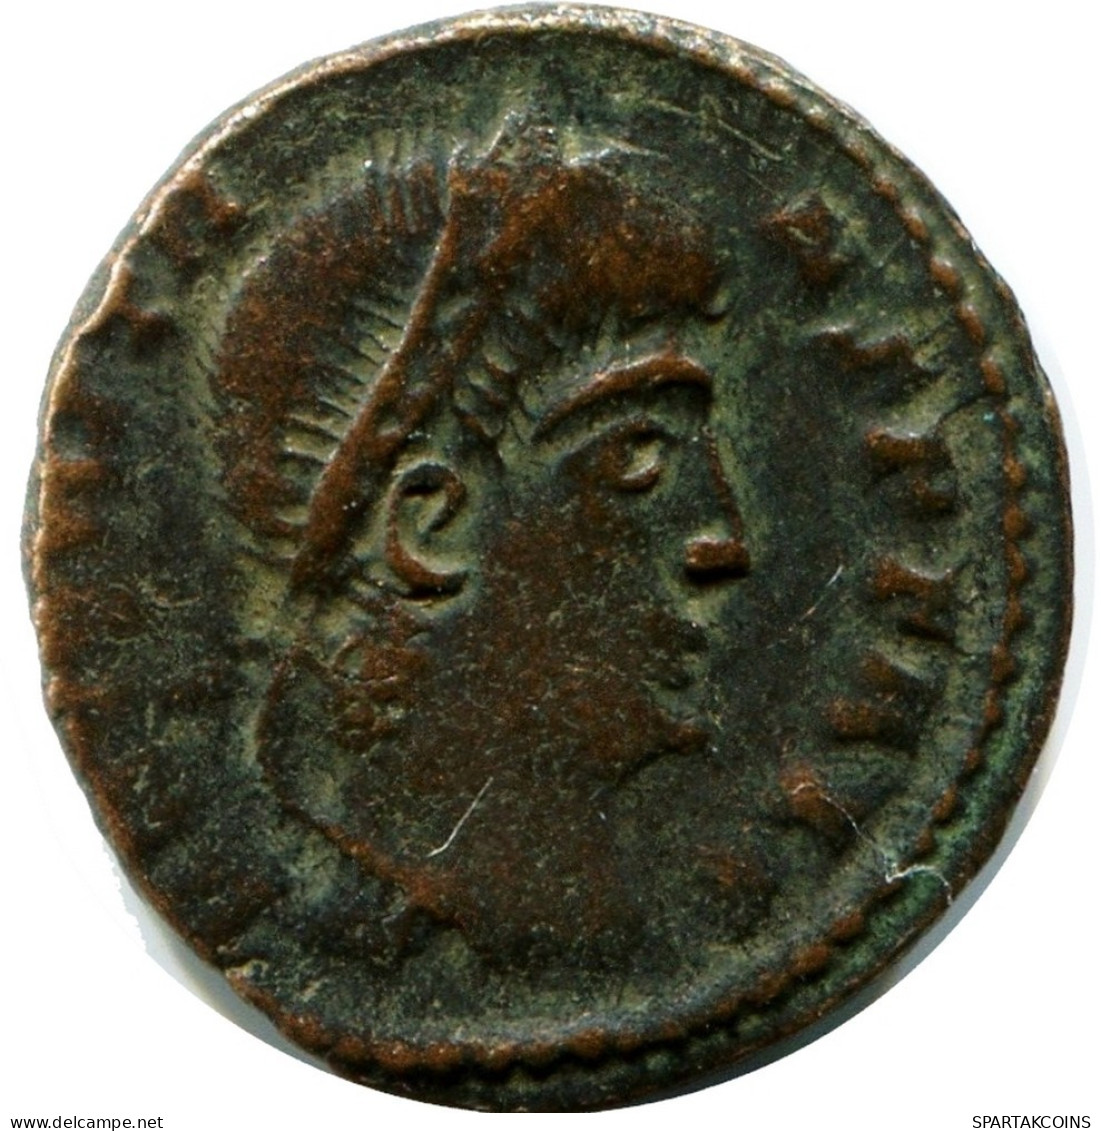 CONSTANS MINTED IN CYZICUS FOUND IN IHNASYAH HOARD EGYPT #ANC11630.14.E.A - The Christian Empire (307 AD To 363 AD)